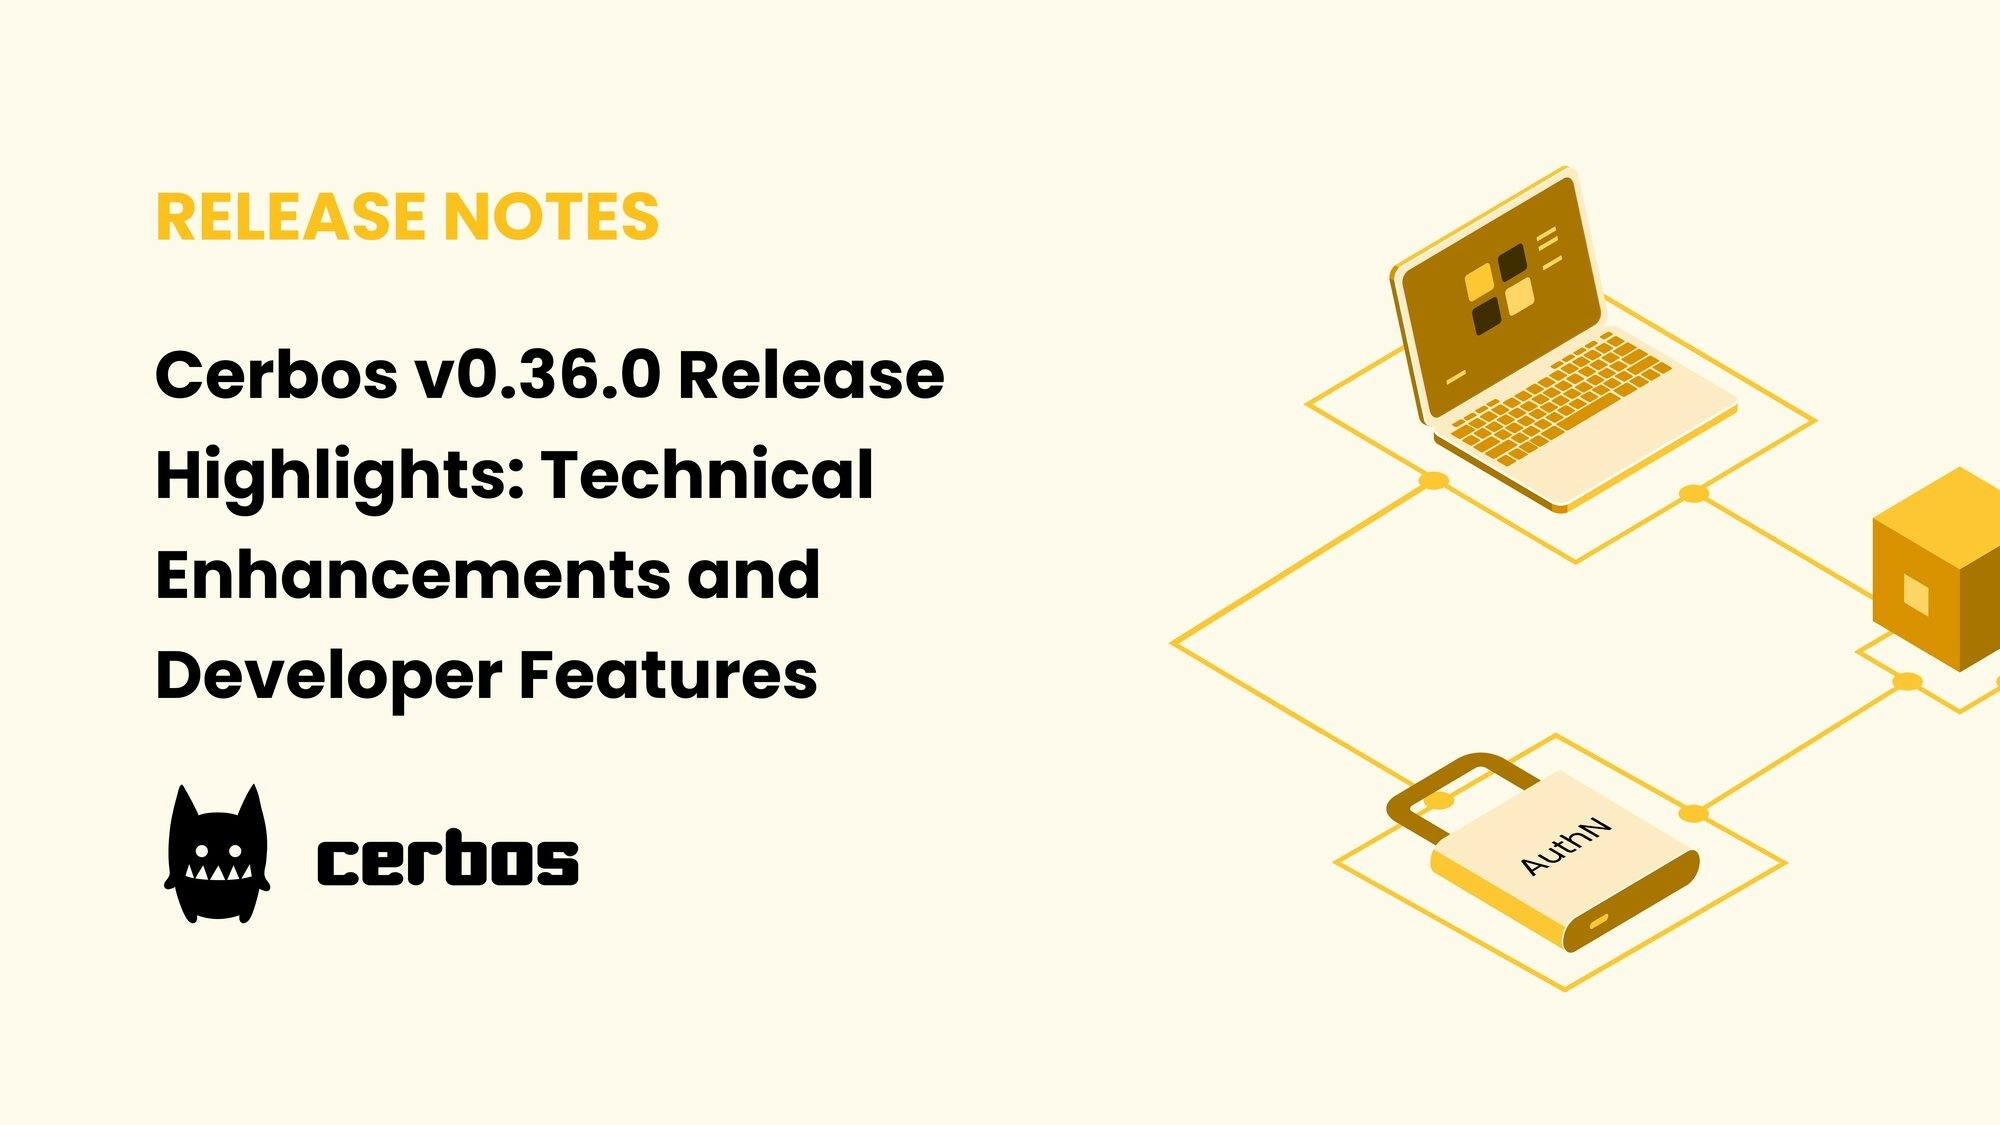 Cerbos v0.36.0 Release Highlights: Technical Enhancements and Developer Features